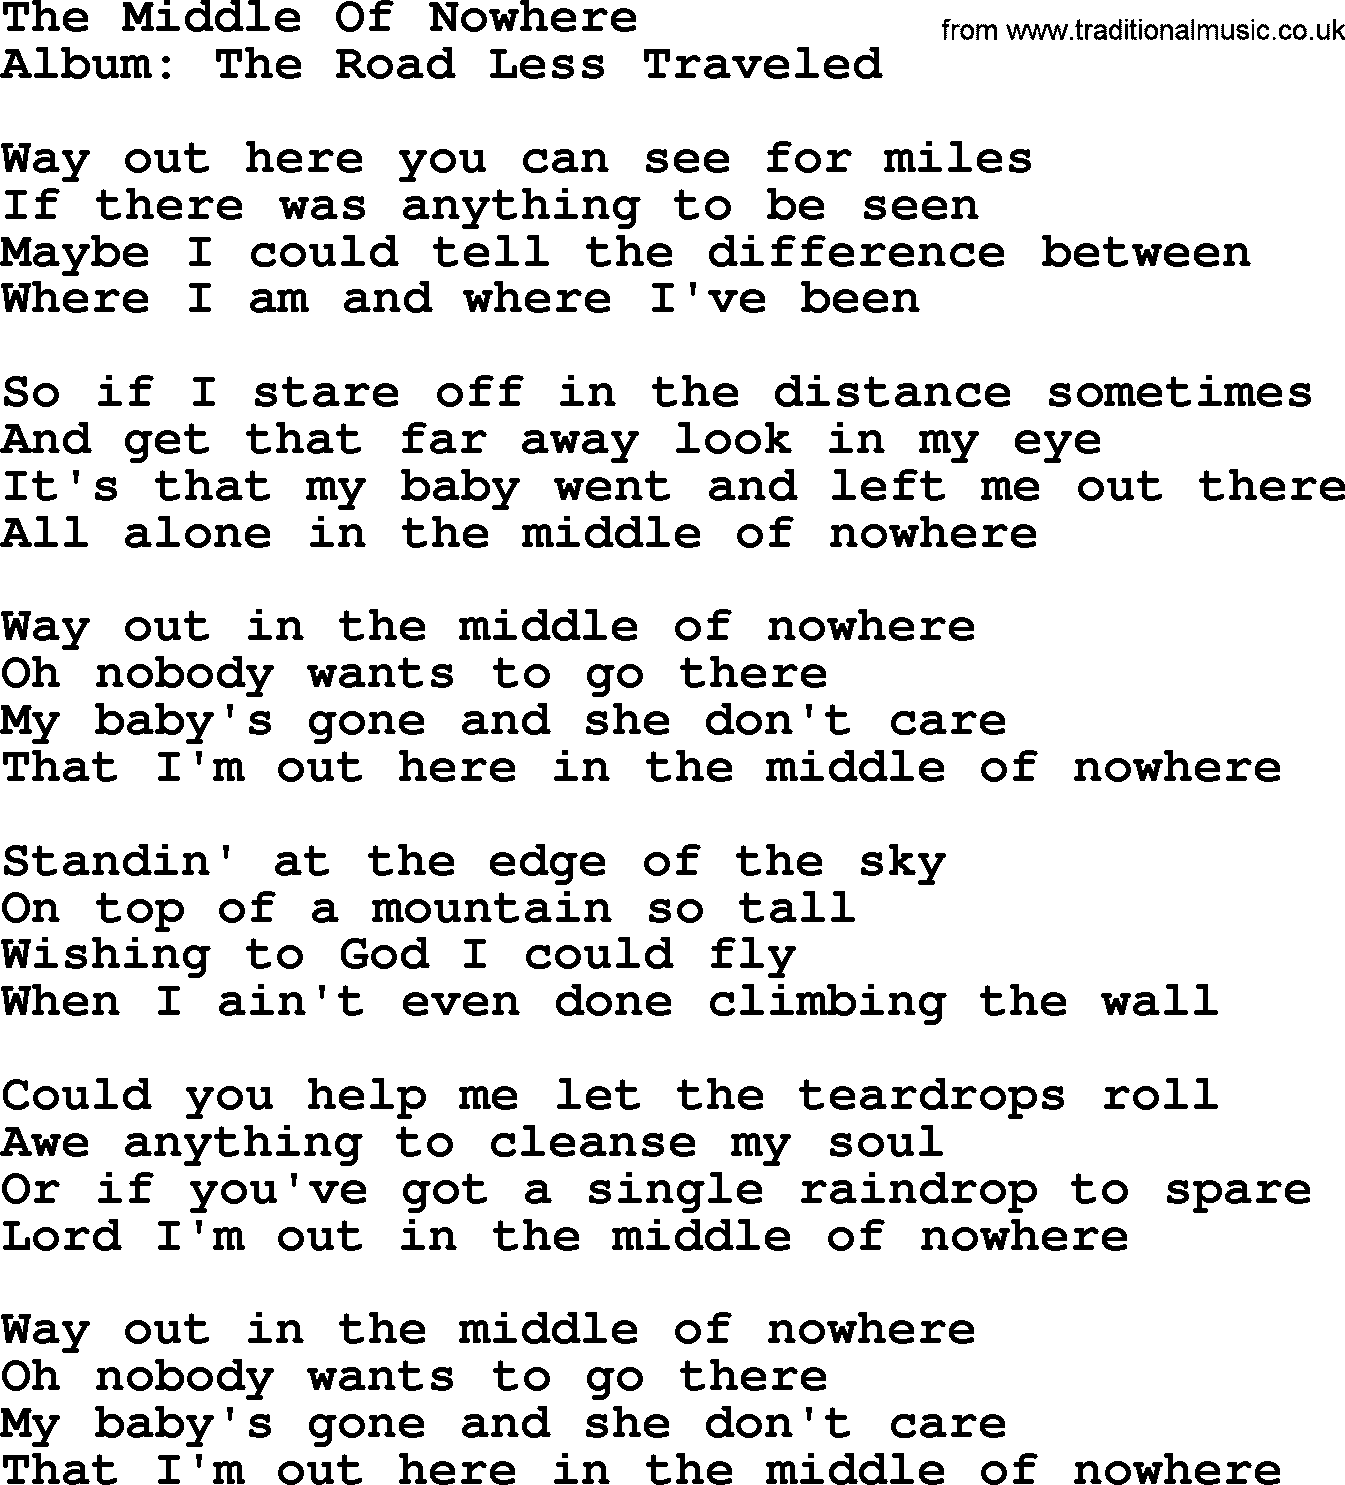 George Strait song: The Middle Of Nowhere, lyrics